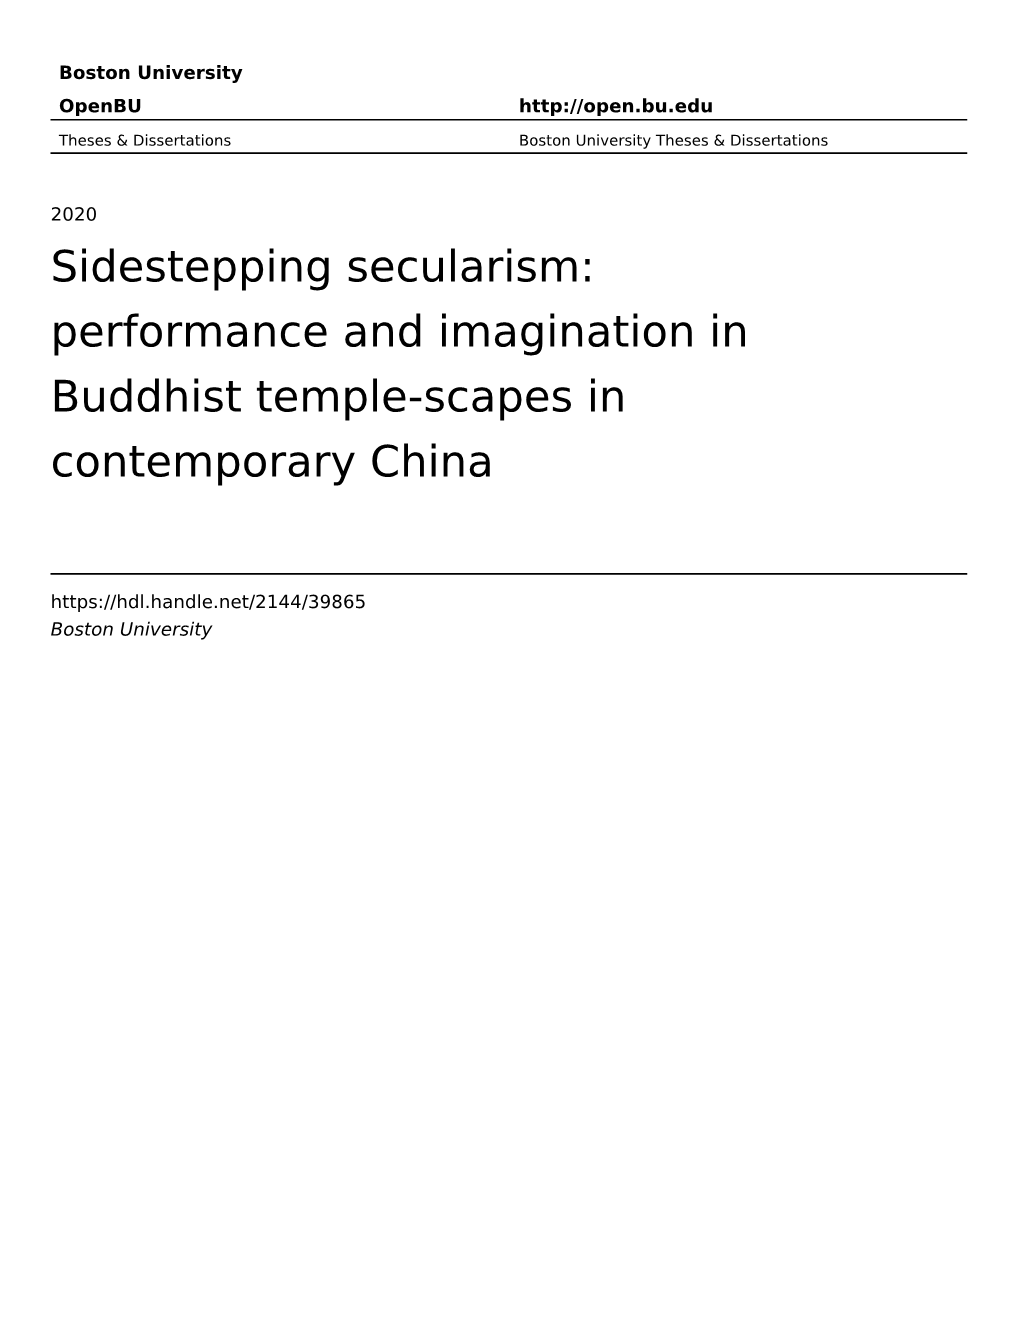 Performance and Imagination in Buddhist Temple-Scapes in Contemporary China